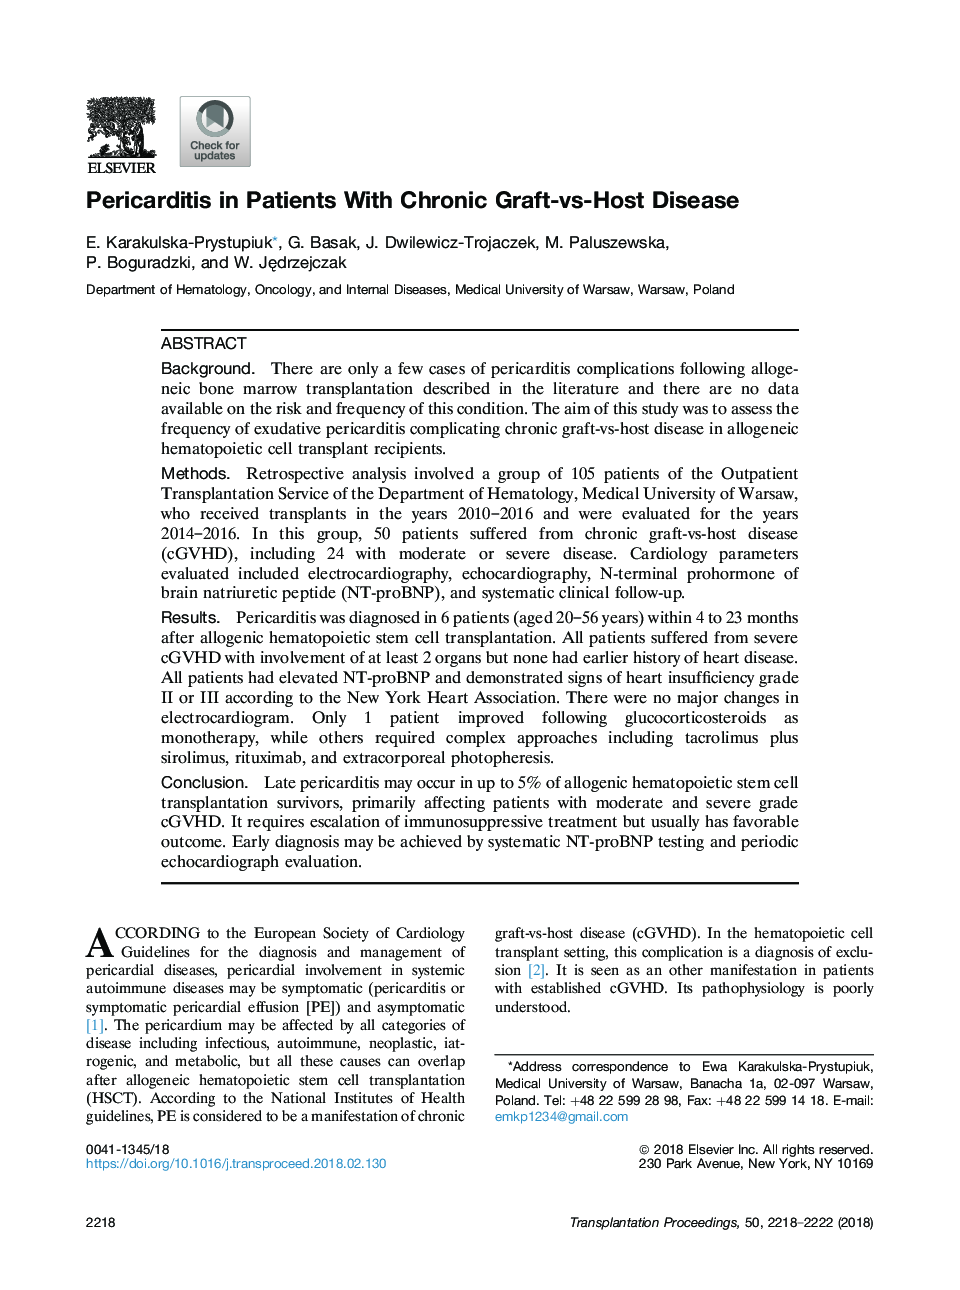 Pericarditis in Patients With Chronic Graft-vs-Host Disease